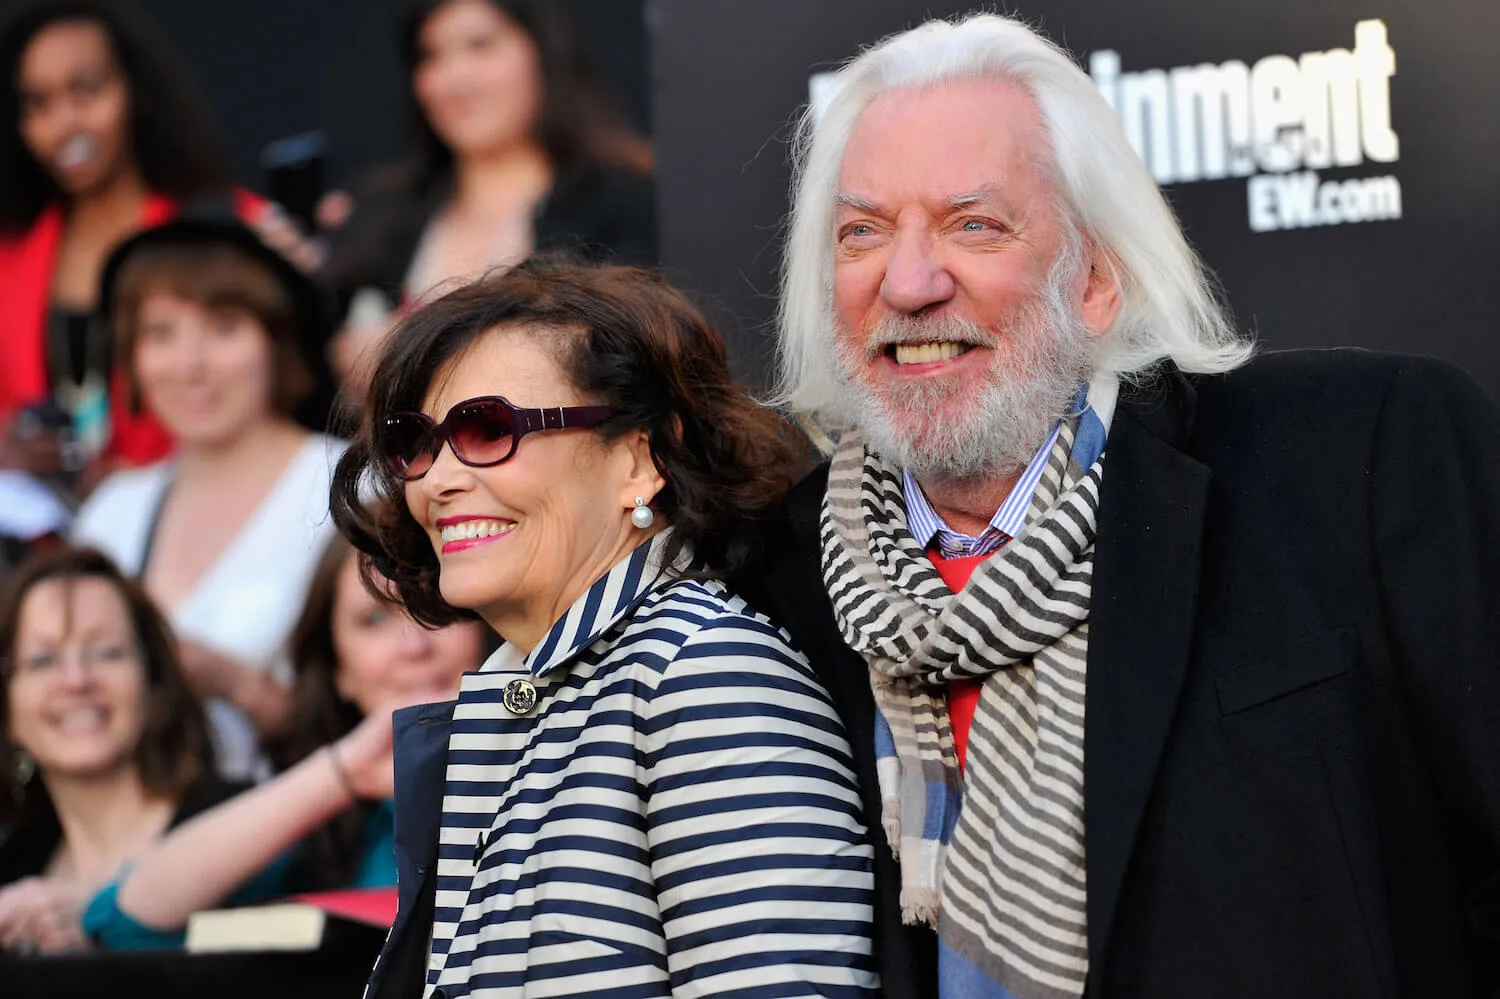 Francine Racette and actor Donald Sutherland arrive to the premiere of 'The Hunger Games' in 2012